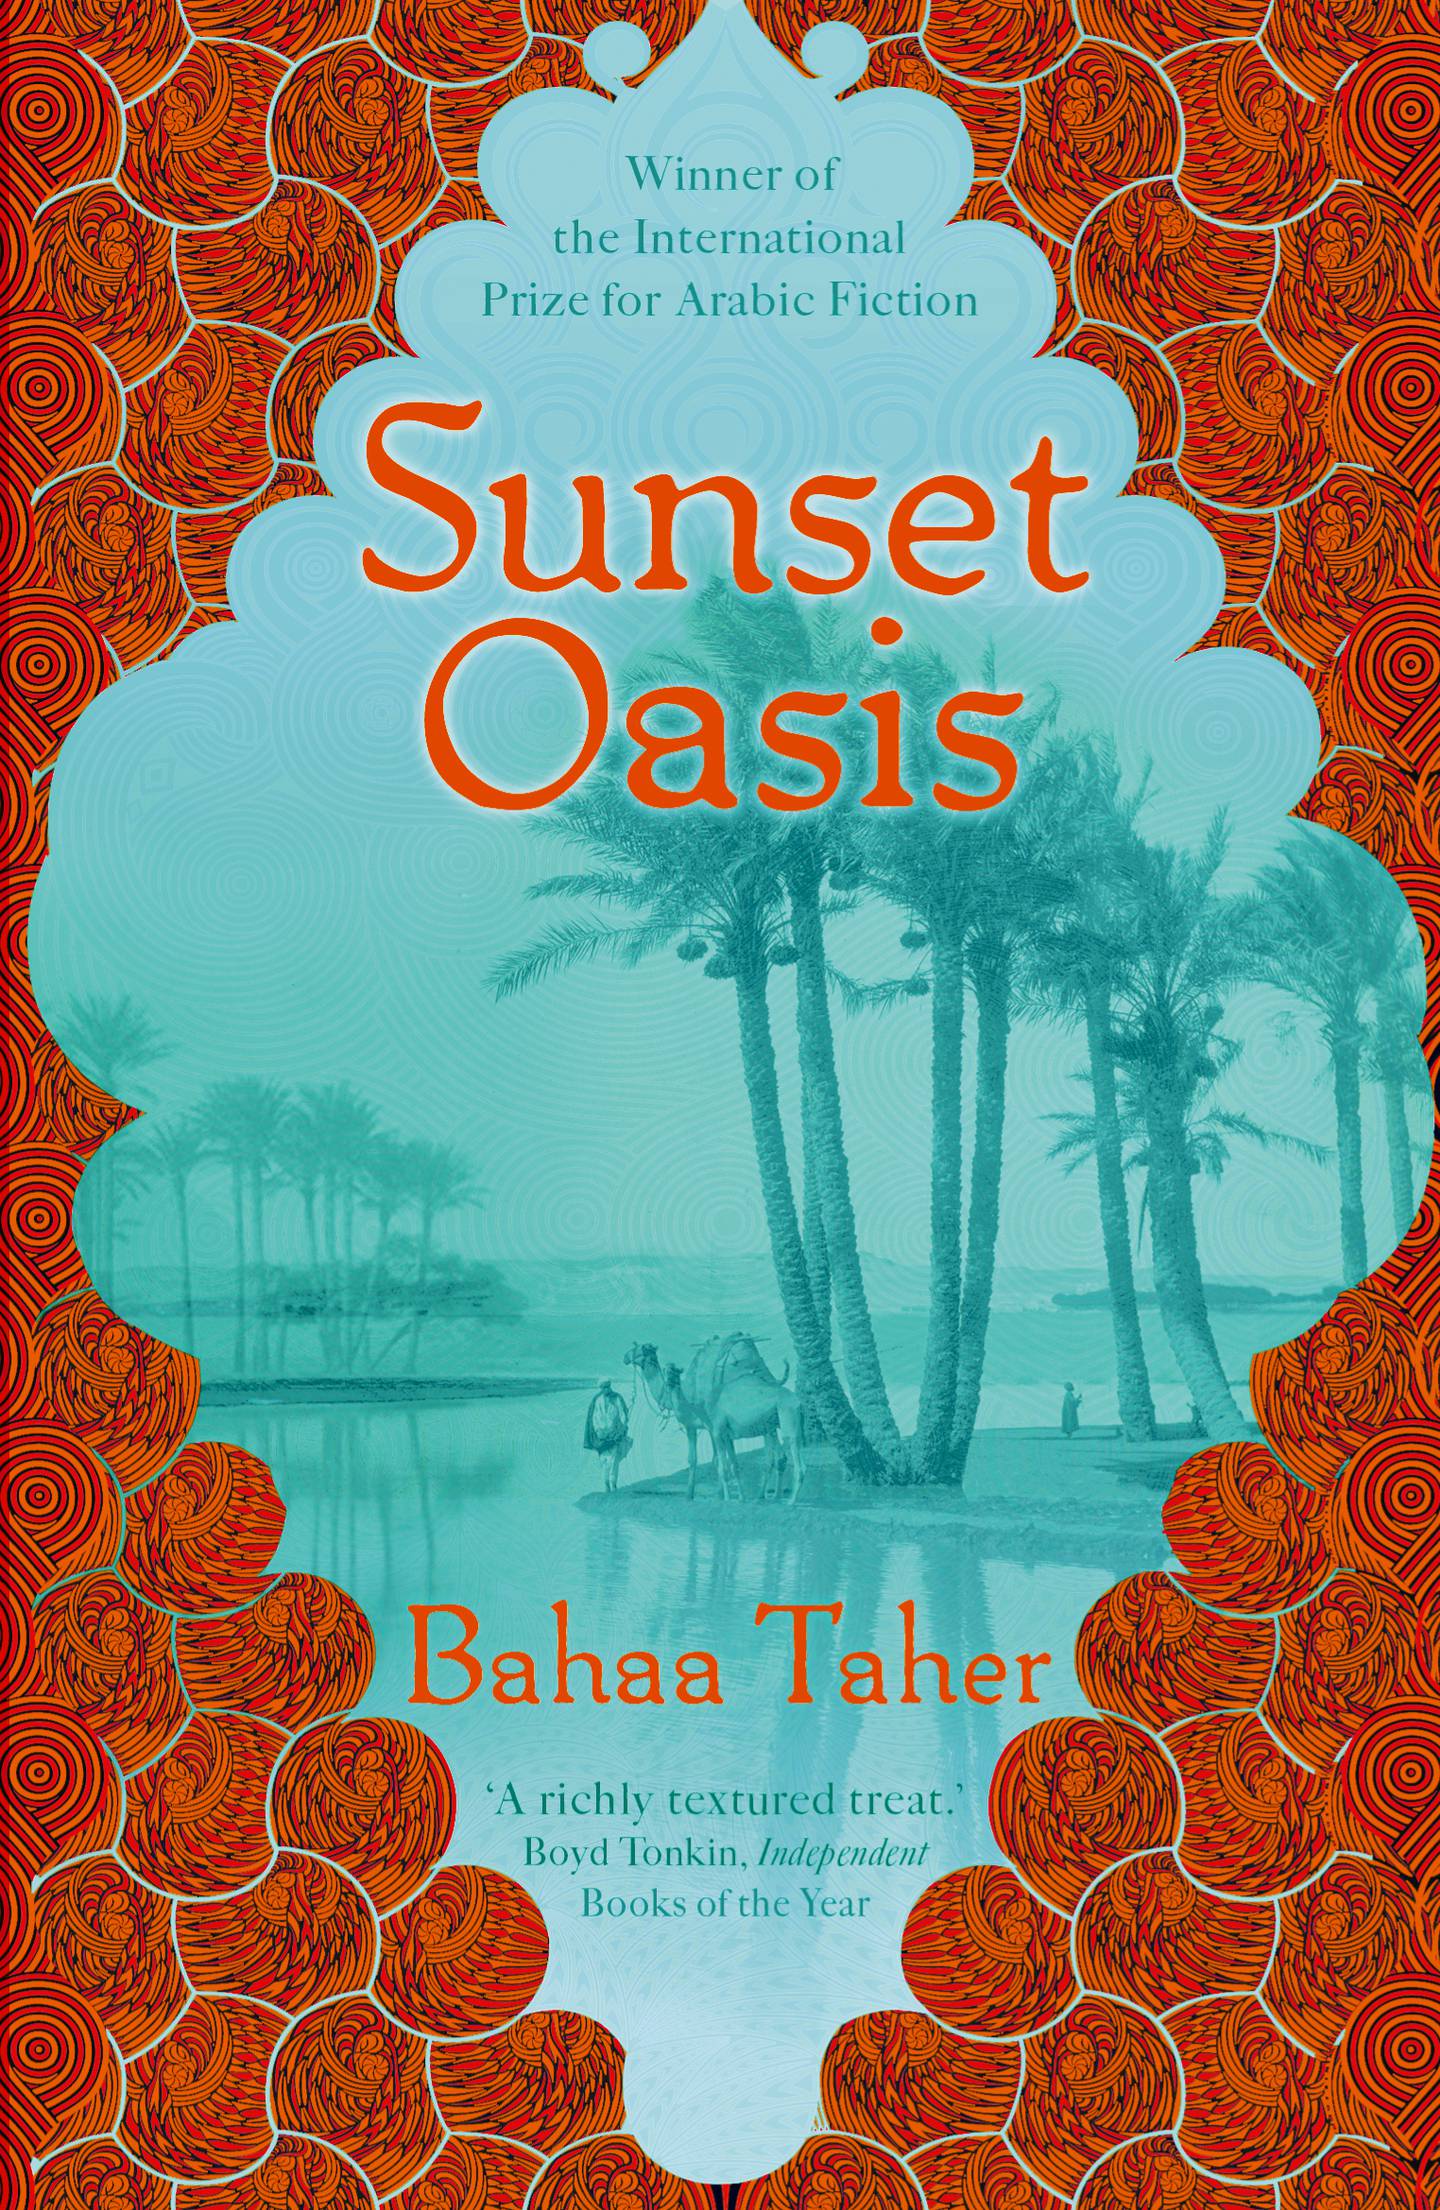 Sunset Oasis by Bahaa Taher published by Sceptre. Courtesy Hodder & Stoughton